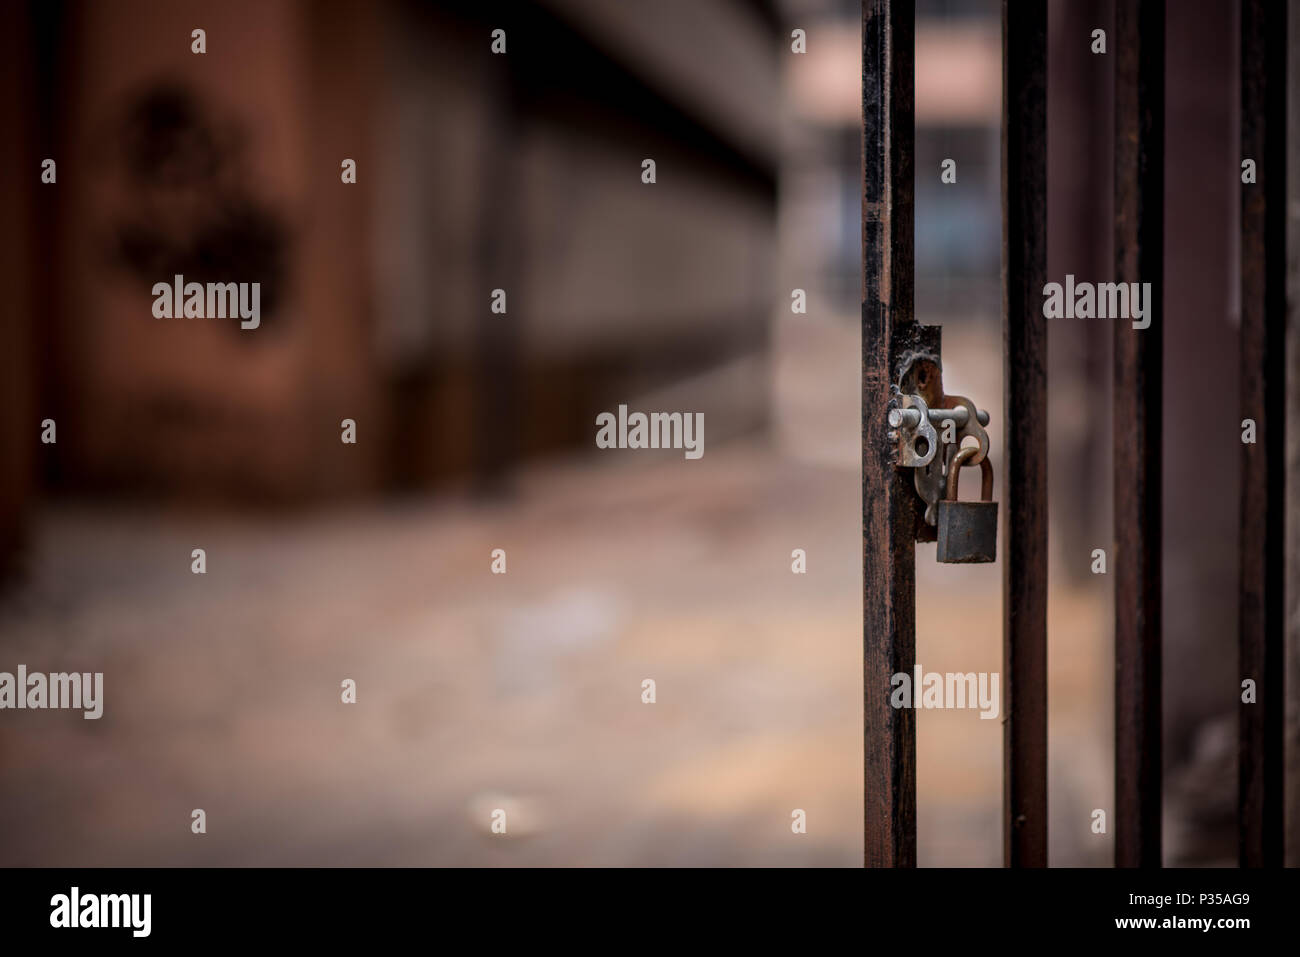 A closeup of a metal door with a padlock in a Johanneburg inner city alley way Stock Photo